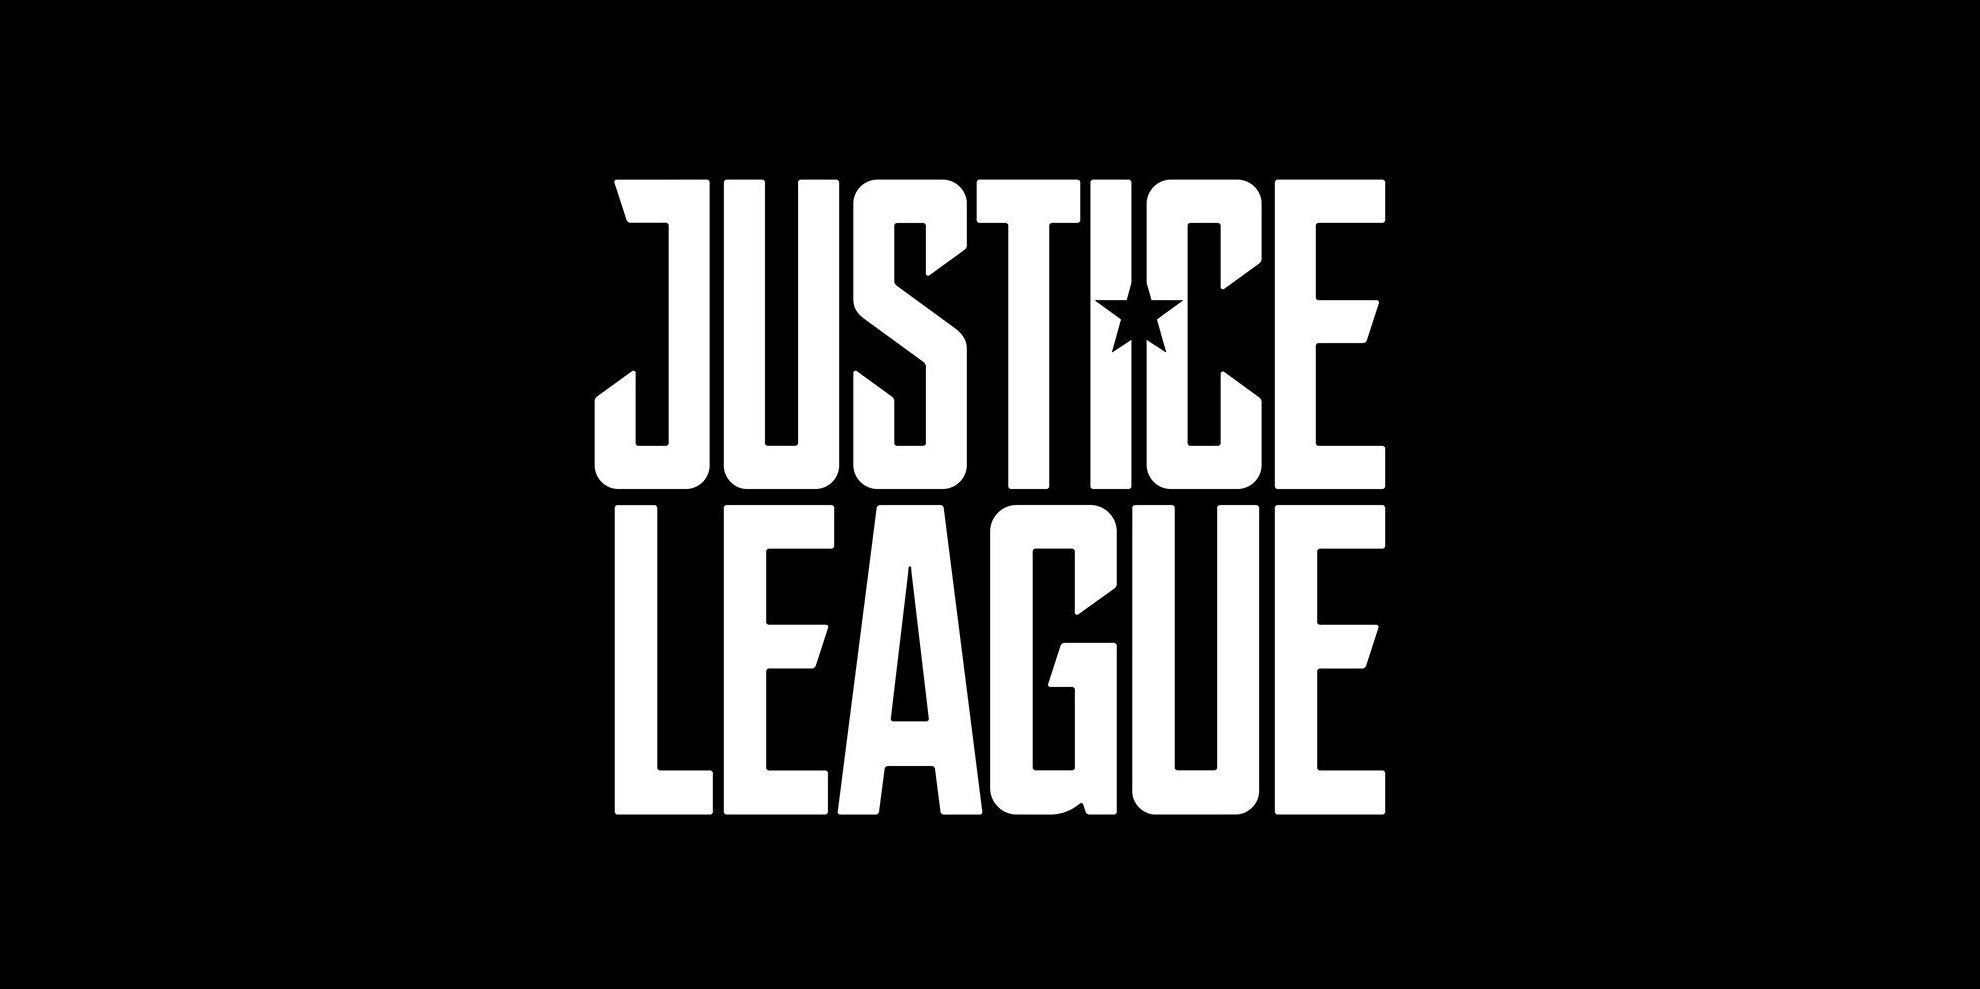 34 Things We Learned on the Set of Justice League